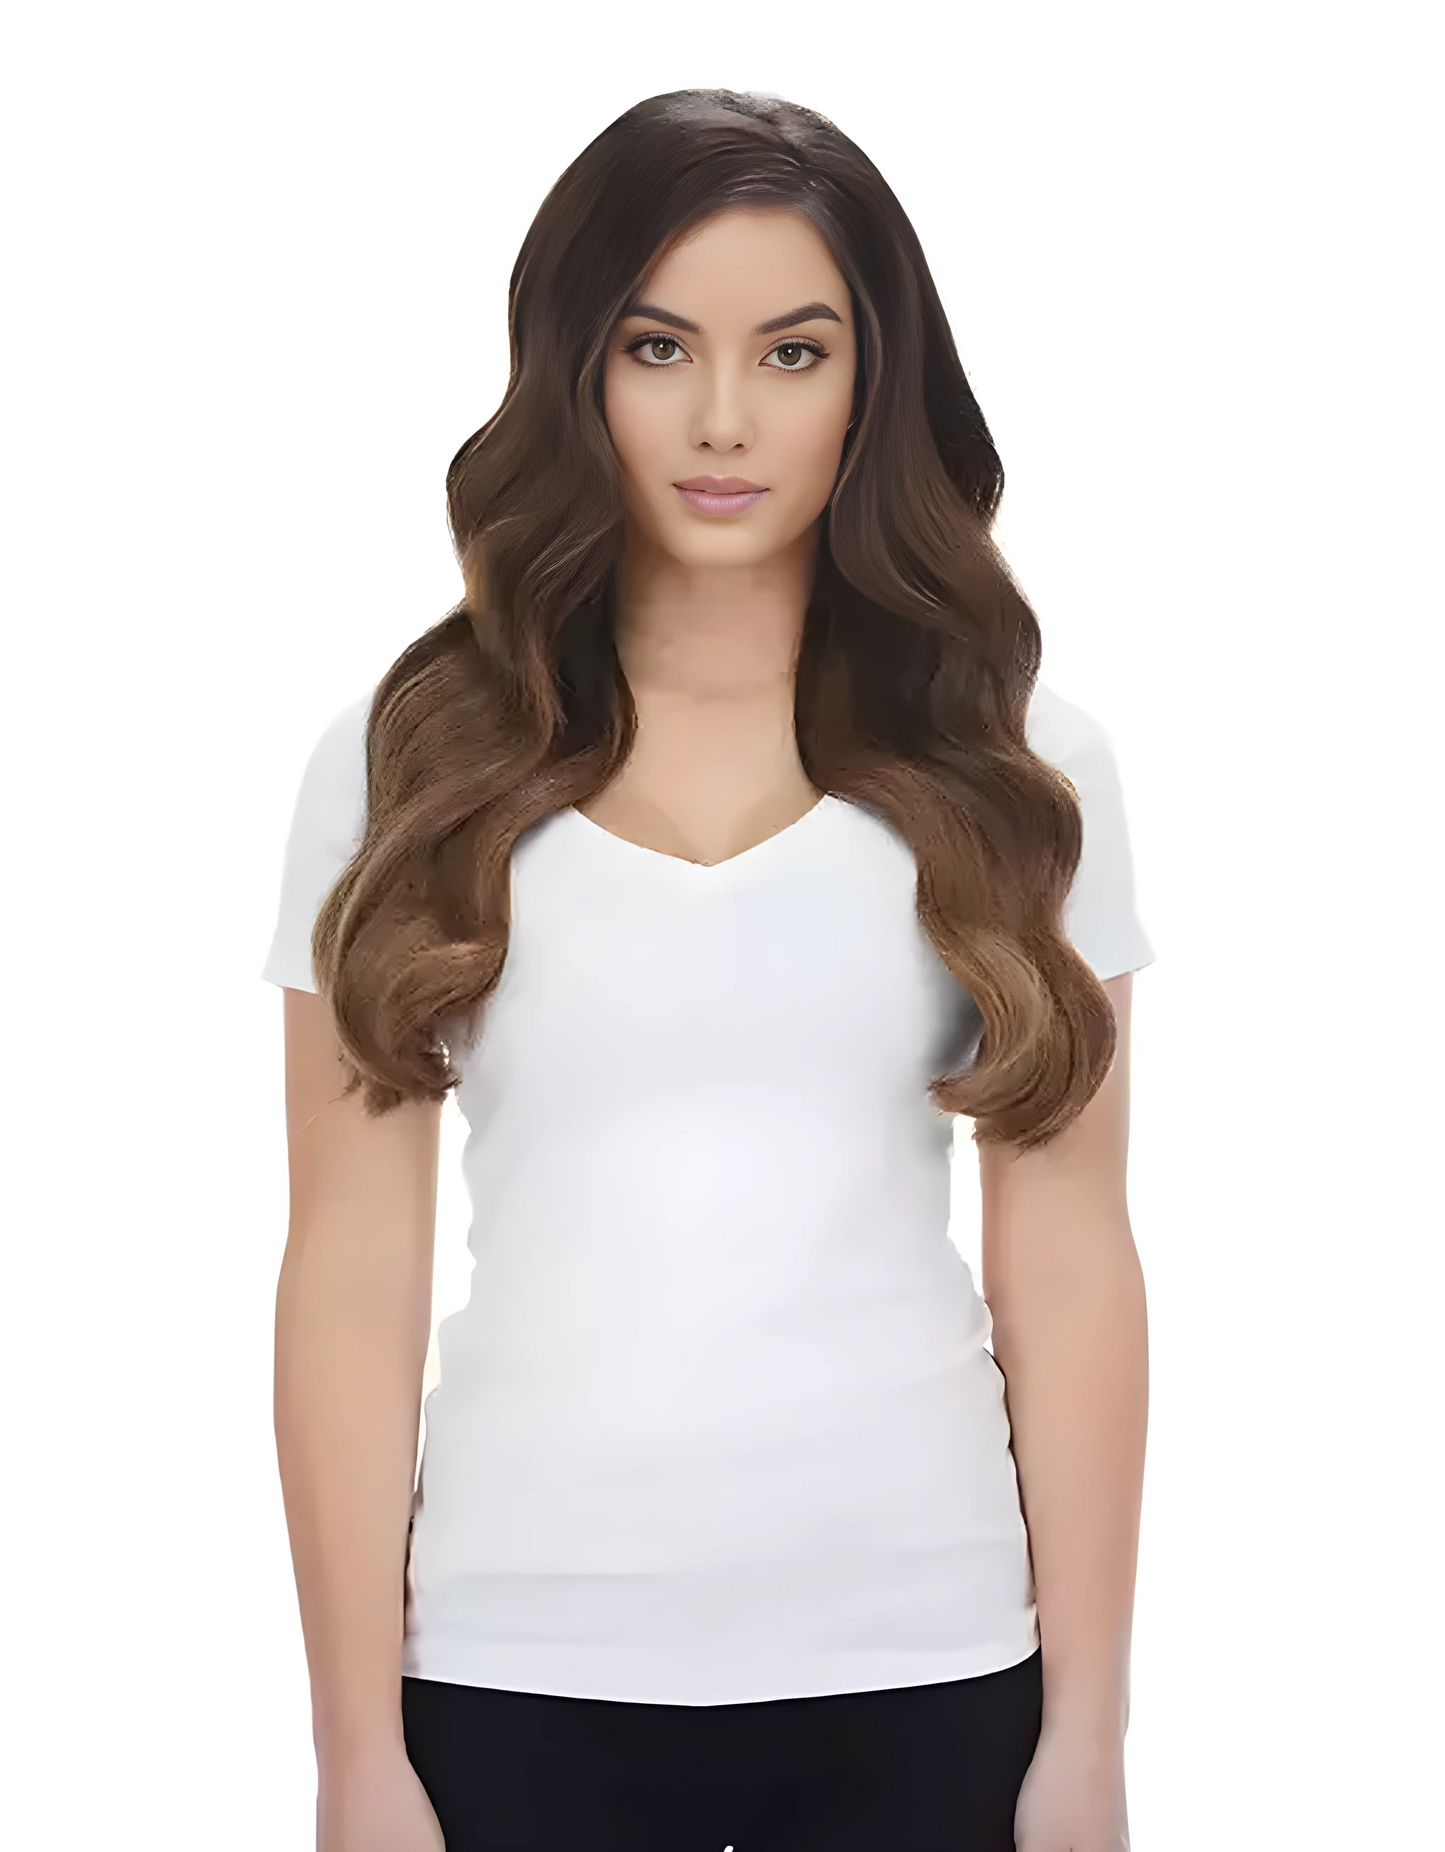 Lush Locks Ombre Clip in Human Hair Extensions